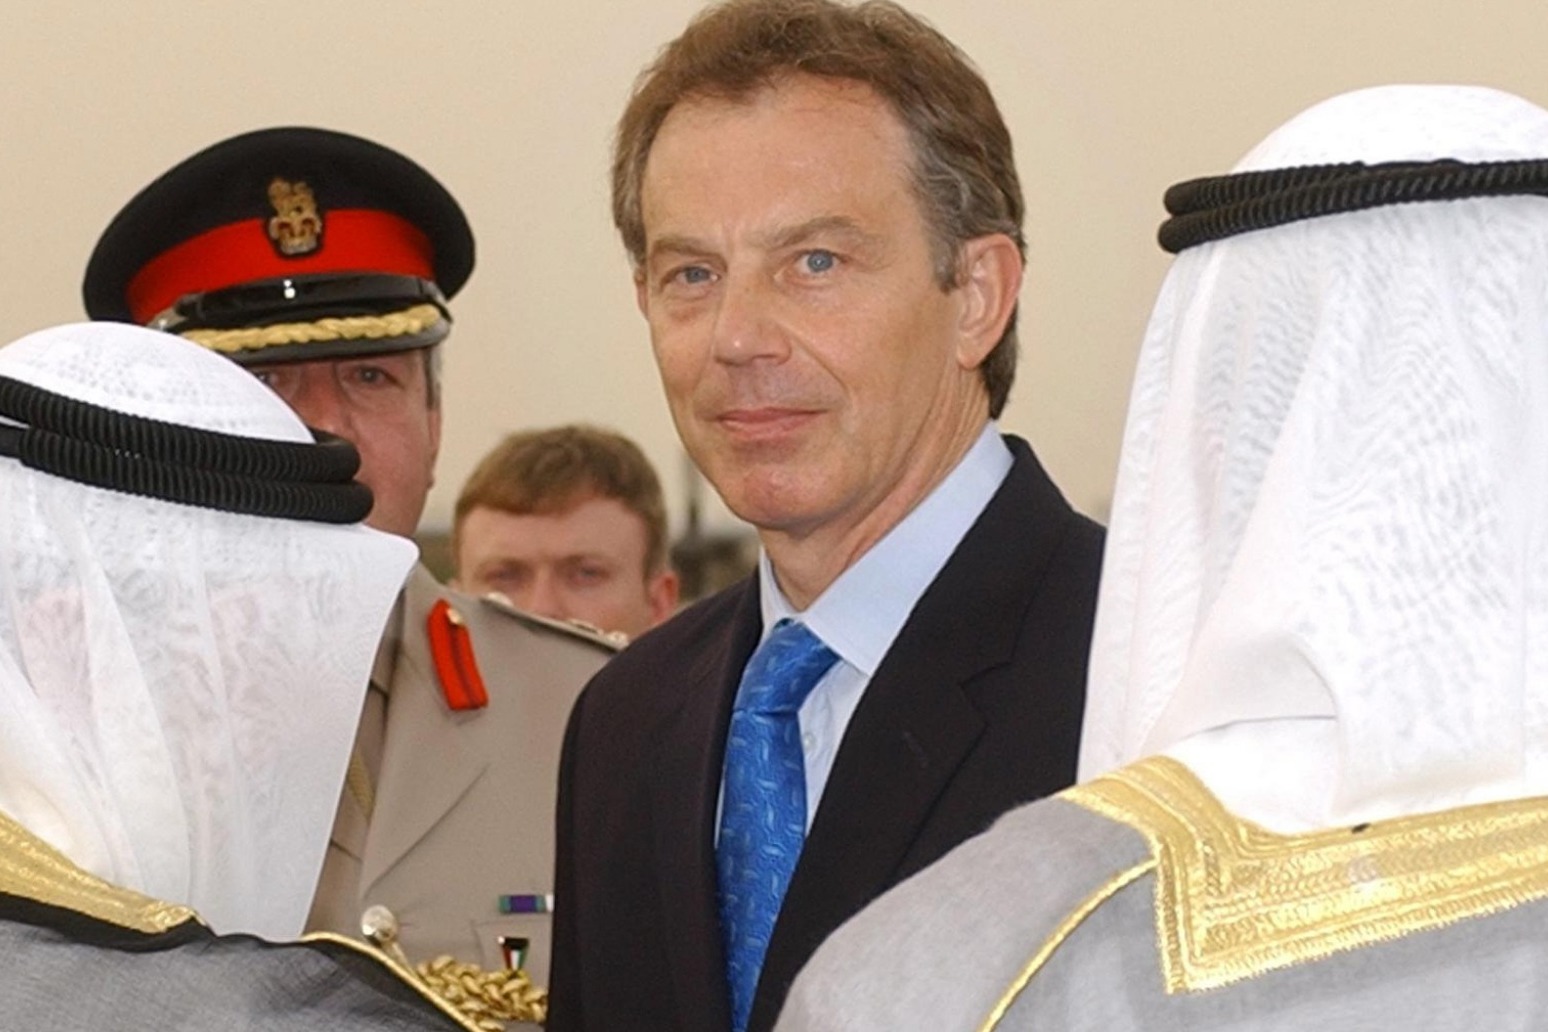 Blair begged Kuwait for arms deal as thank you for Gulf War help papers suggest